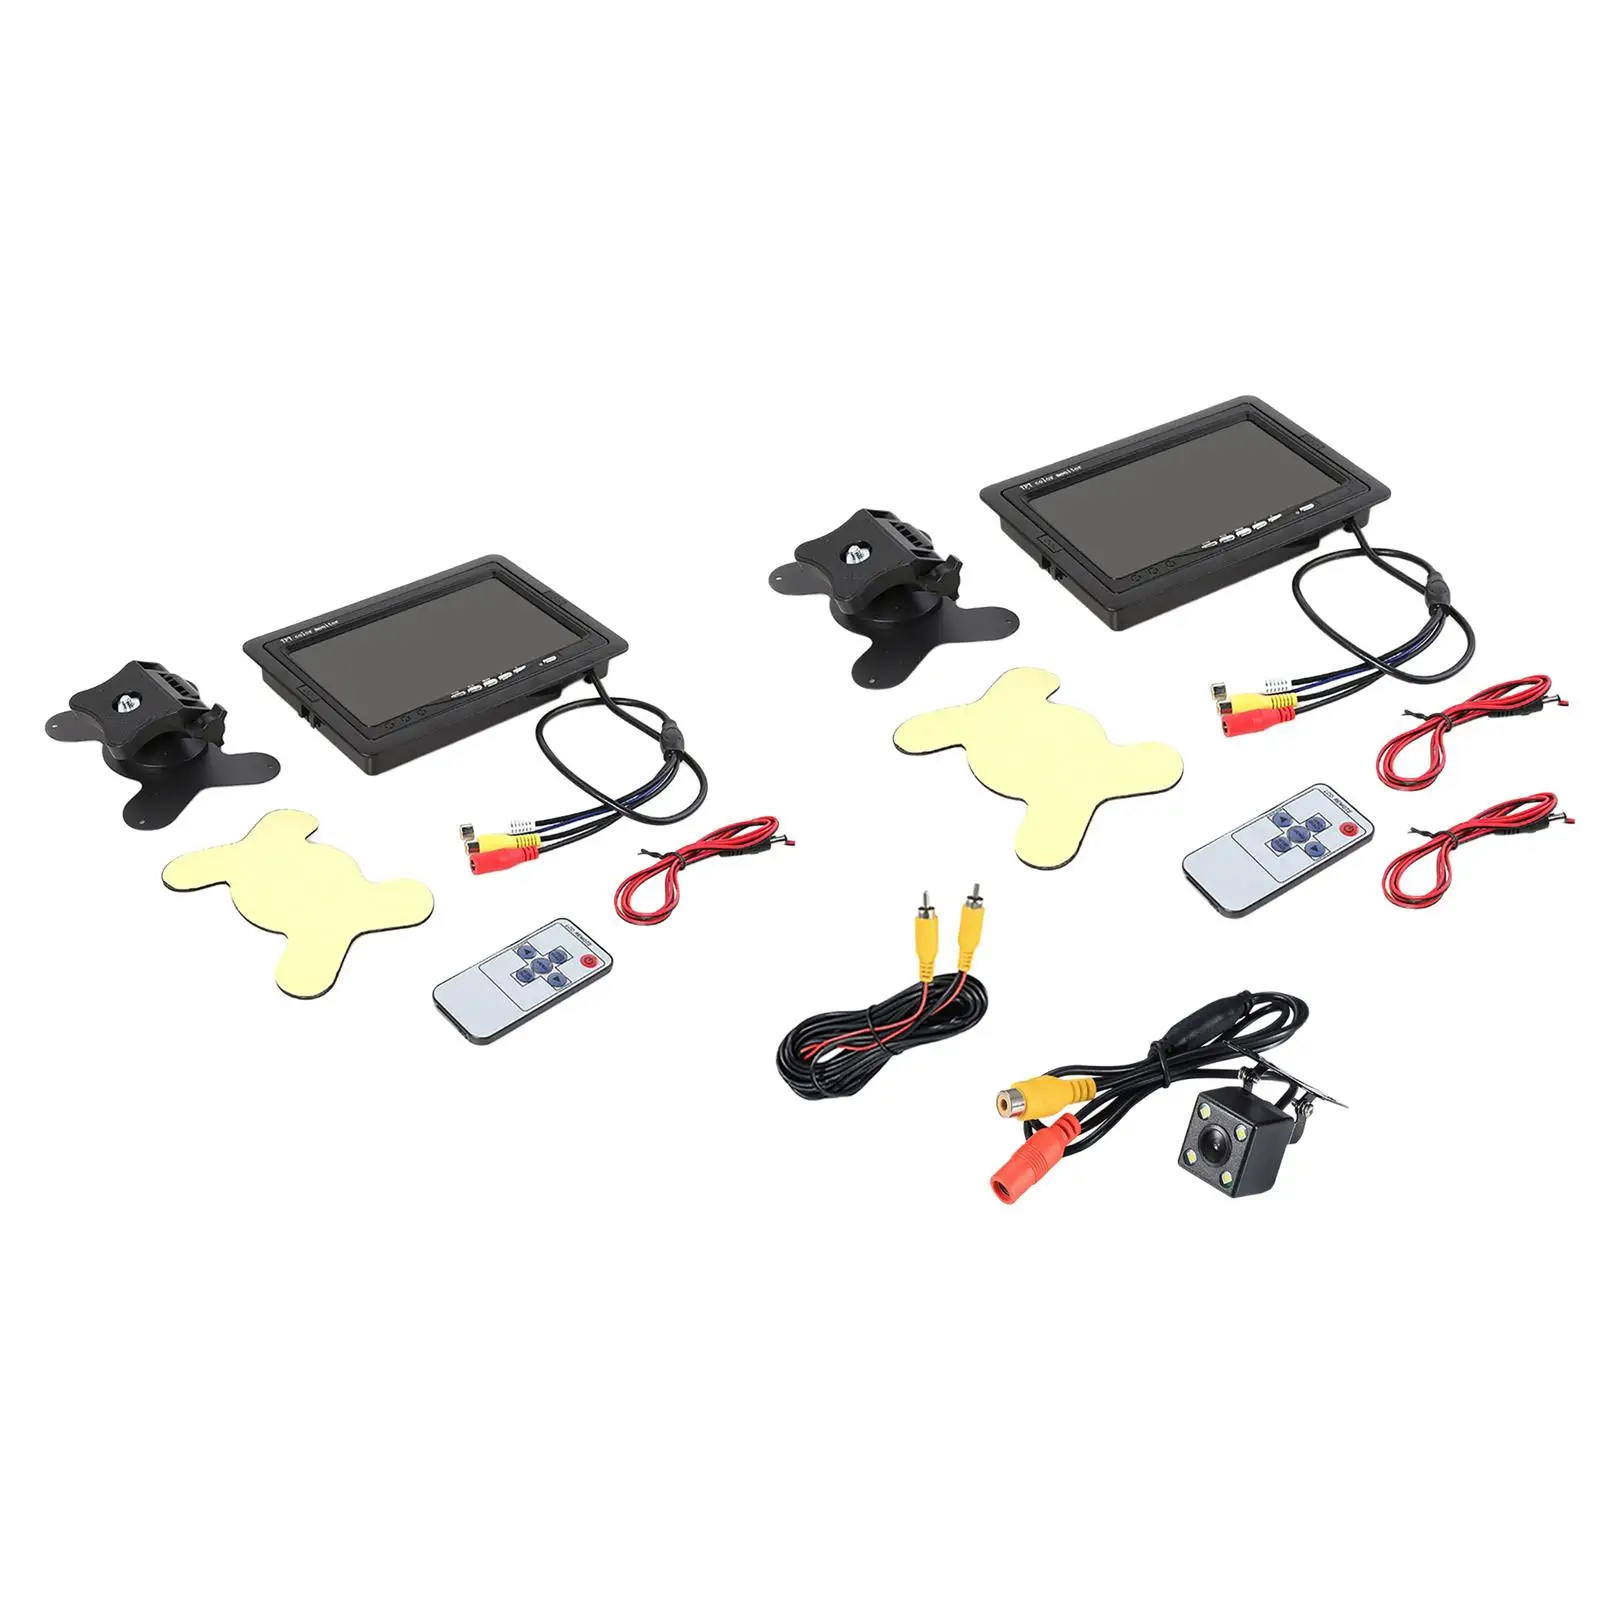 7 Inches Color TFT LCD Rearview Monitor Vehicle Parking Monitor Parking Assist Kit